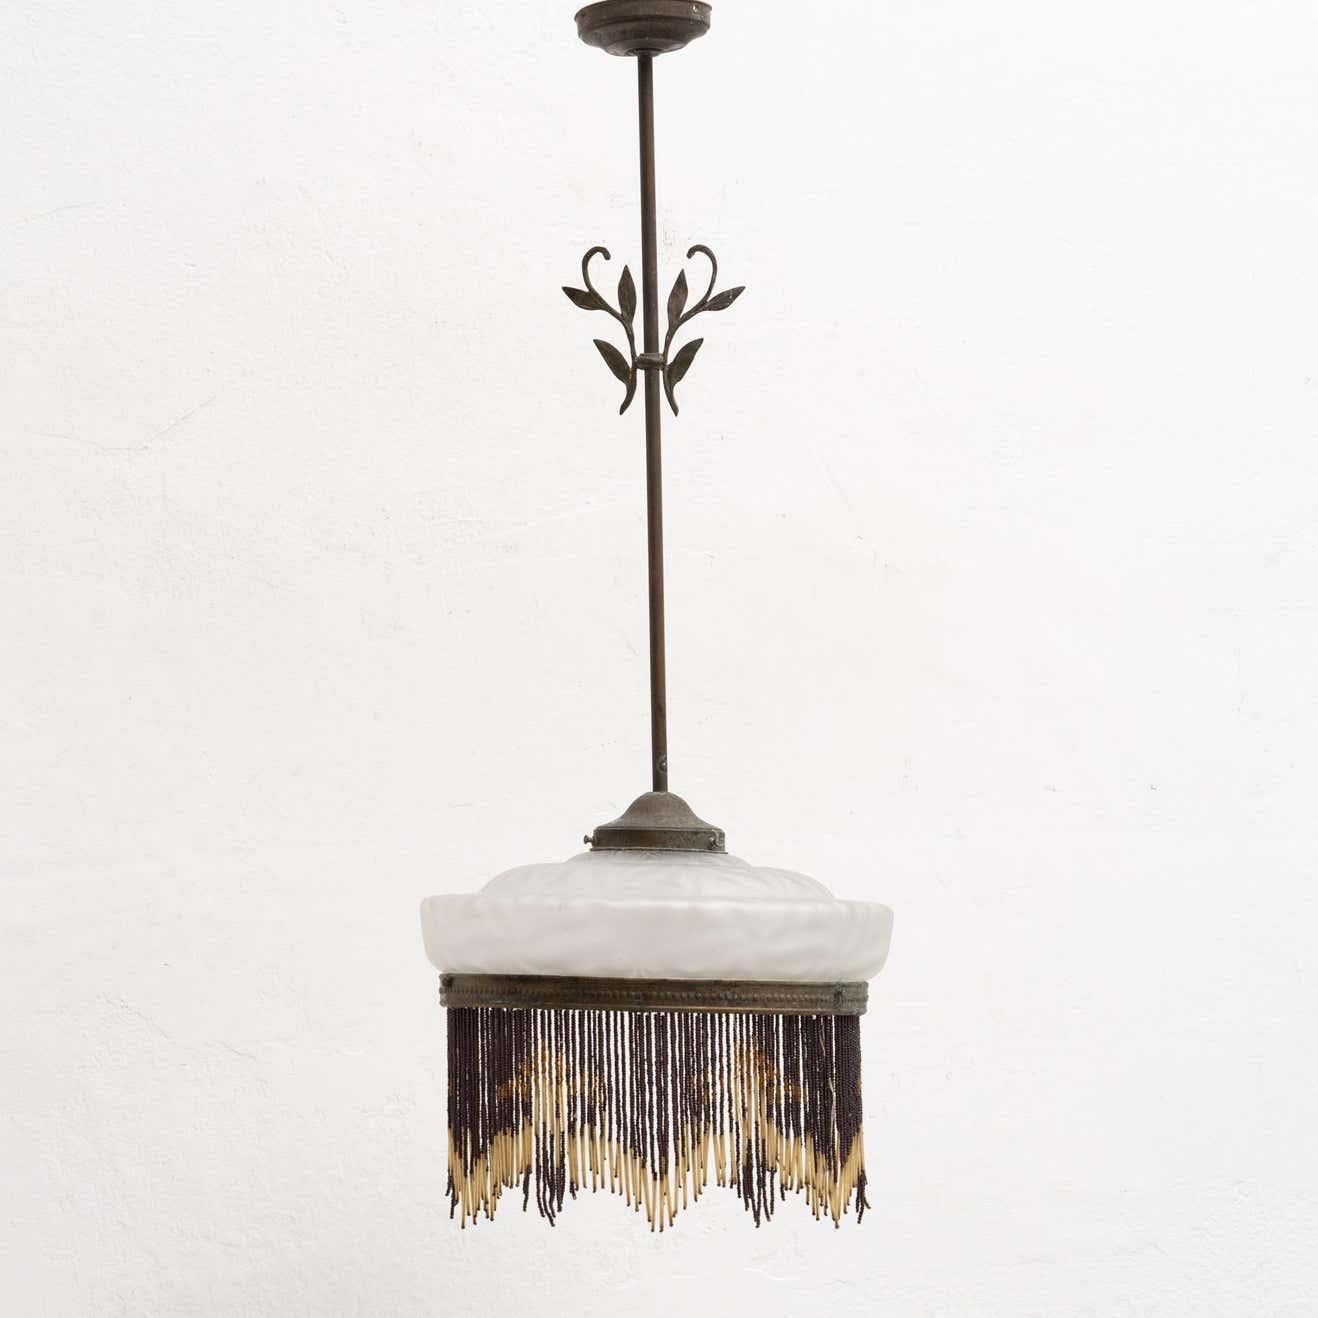 French vintage metal and glass Art Deco hanging lamp.

By unknown manufacturer from France, circa 1930.

In original condition, with minor wear consistent with age and use, preserving a beautiful patina.

Materials:
Glass
Metal.
 